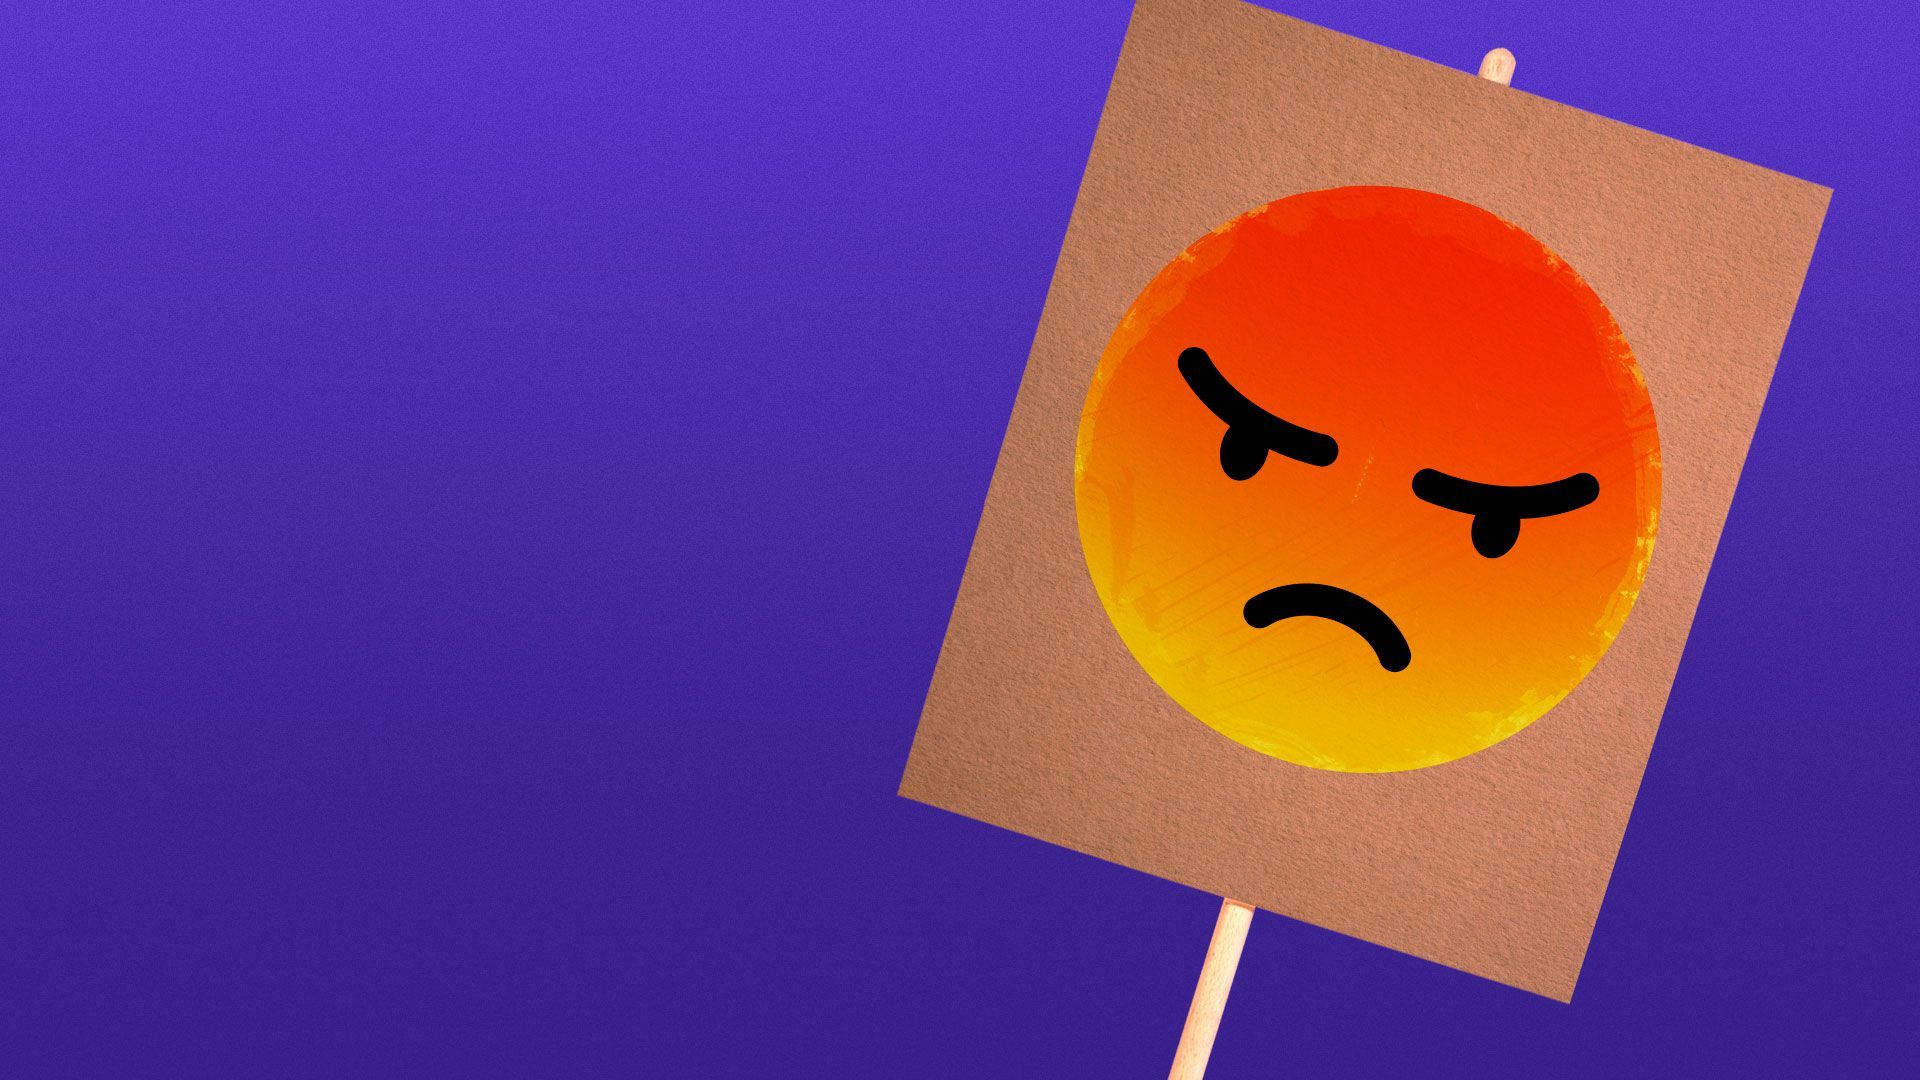 Illustration of protest sign with angry emoji